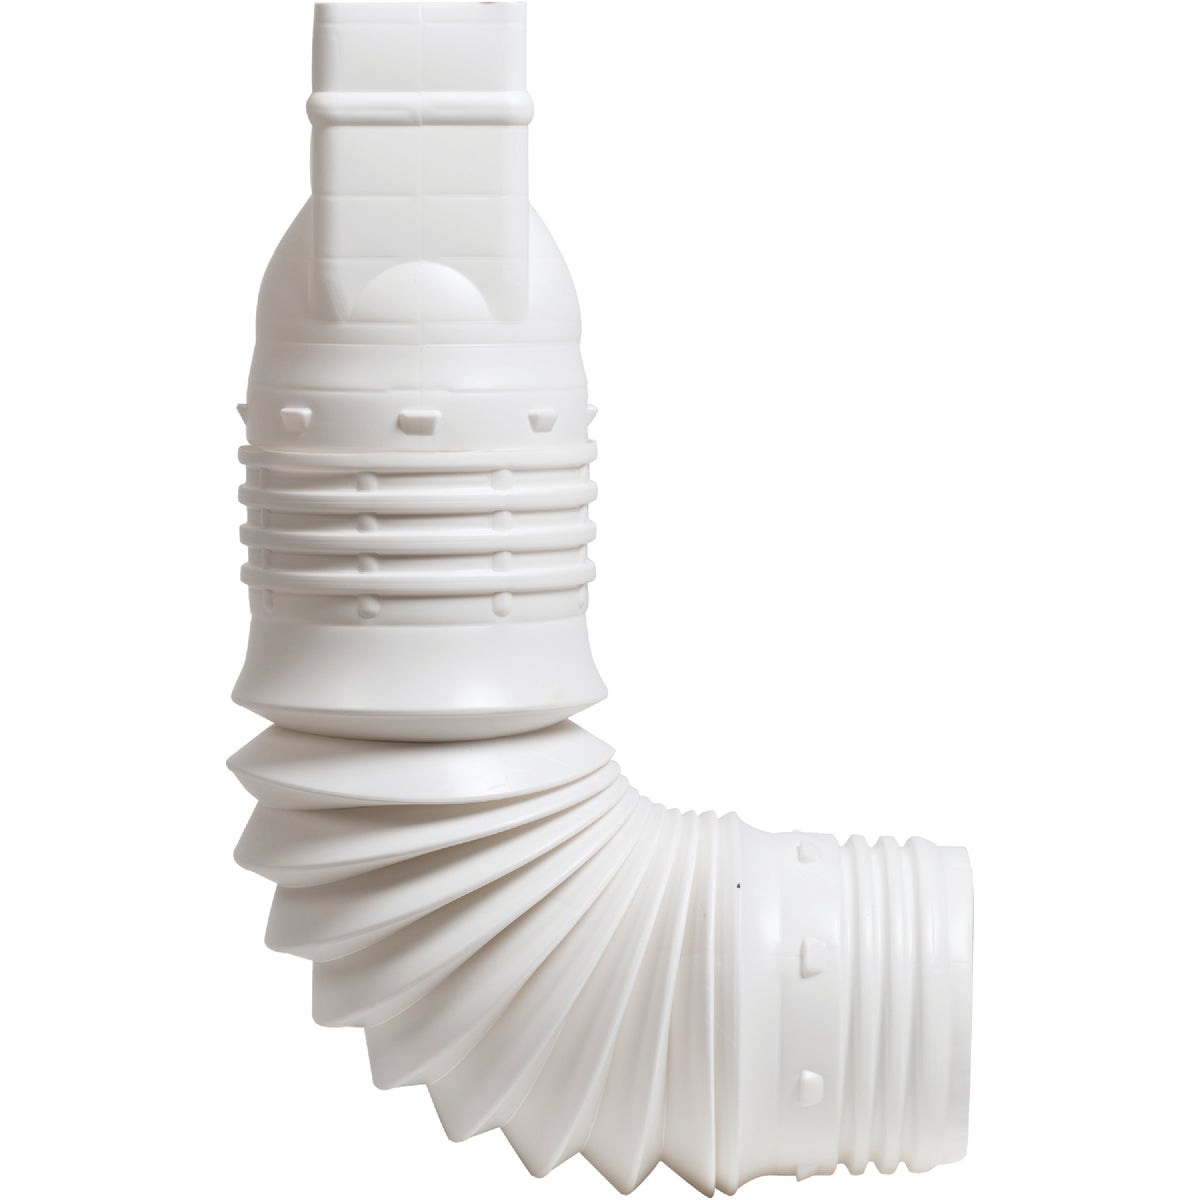 Amerimax Flex-A-Spout 3 In. X 4 In. X 3 In. or 4 In. Downspout Adapter